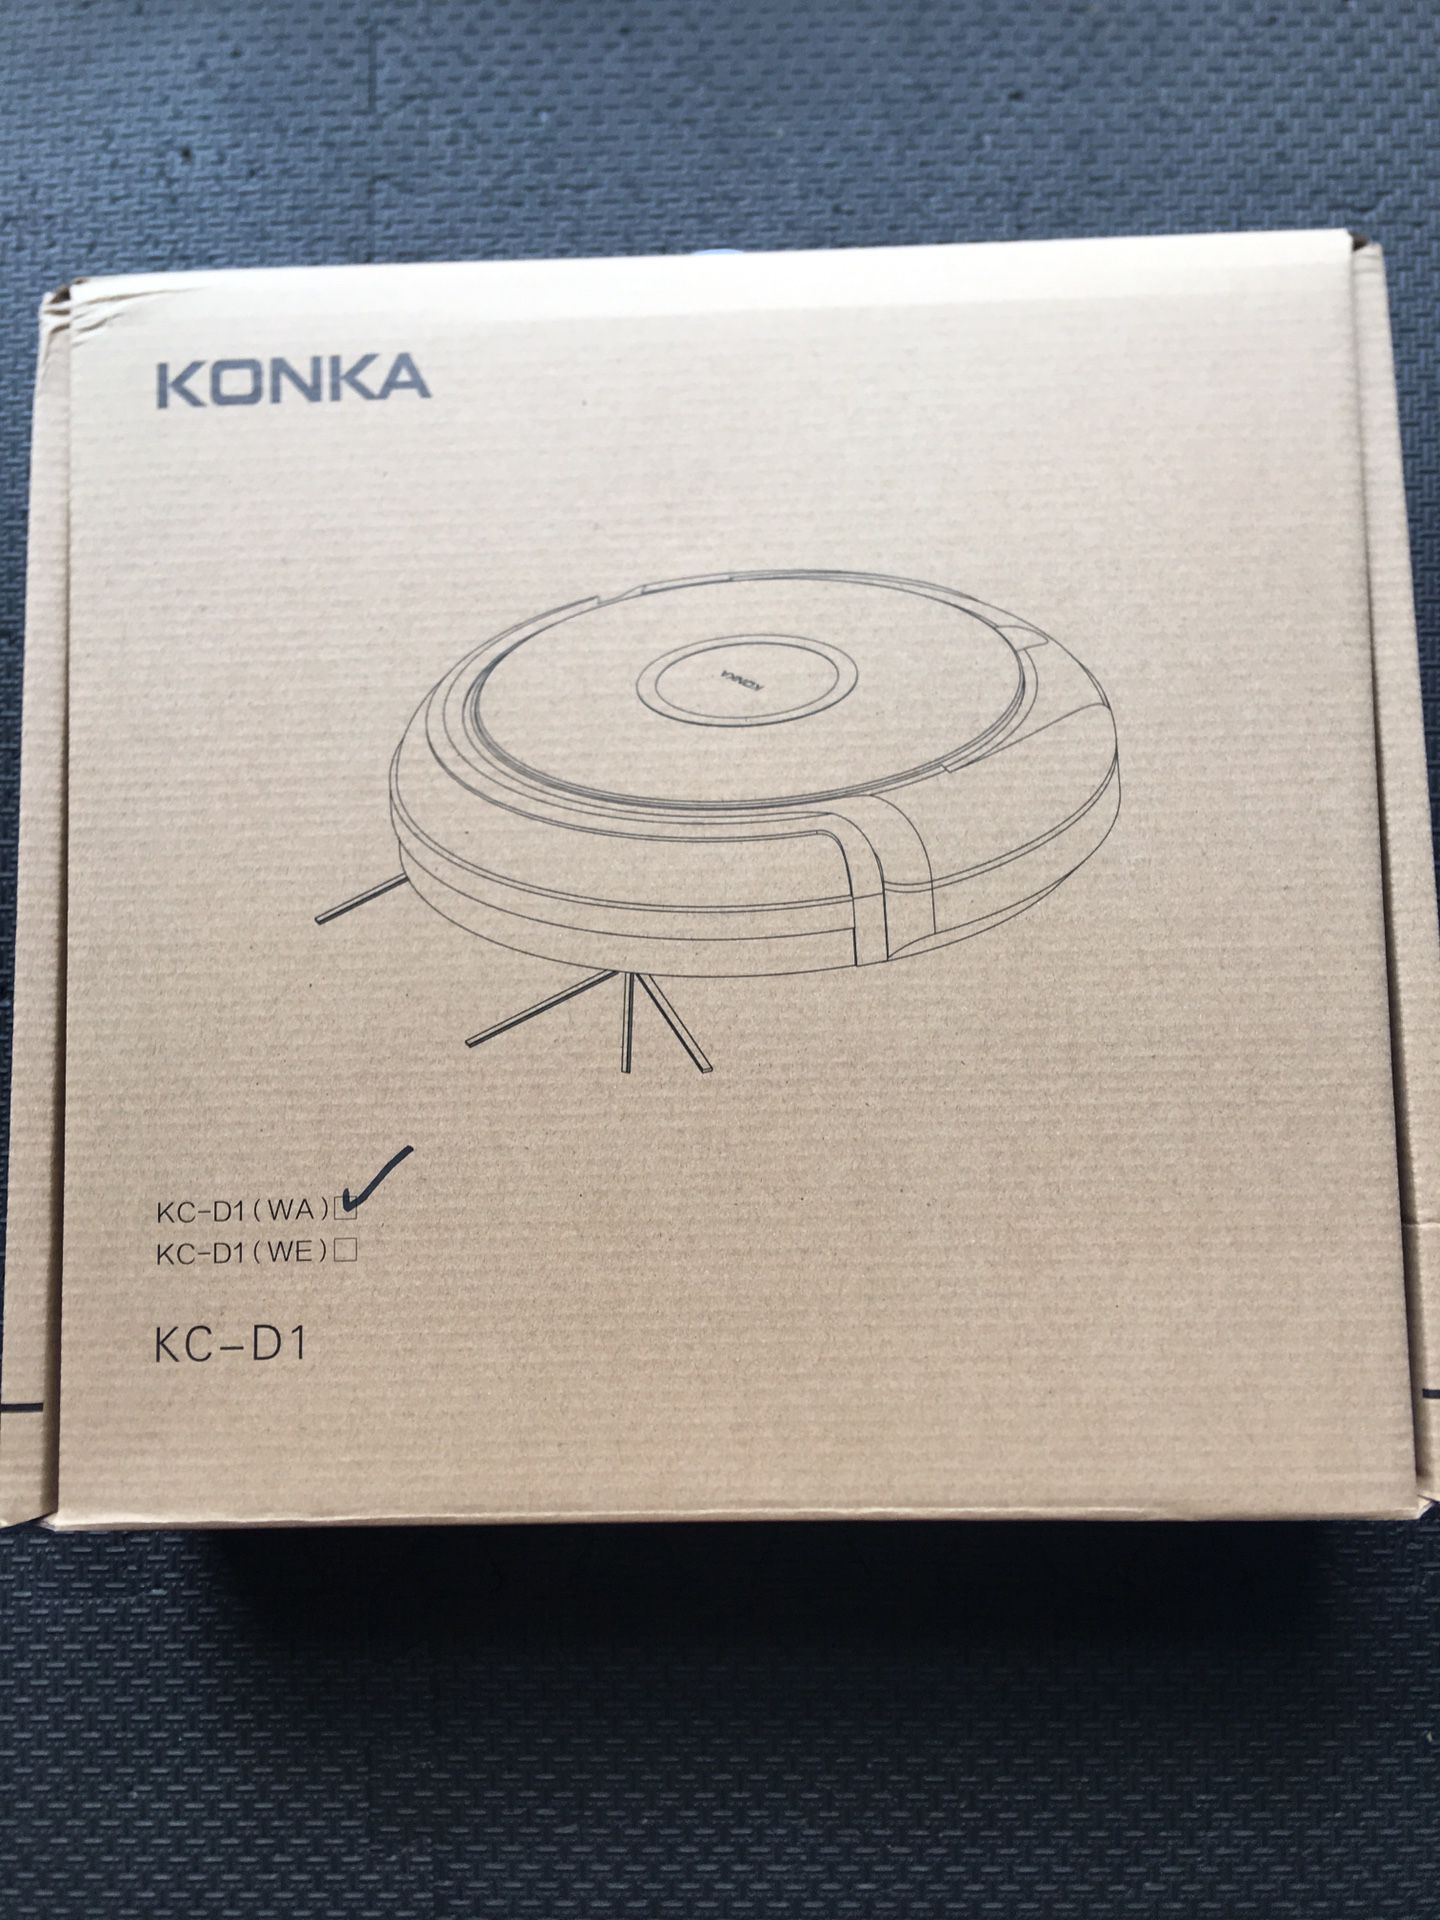 KONKA KC-D1 Automatic Robotic Vacuum Cleaner Sweeper, 220V 25W Intelligent Sweeping Robot with Drop-Sensing Technology and Powerful Suction for Hard